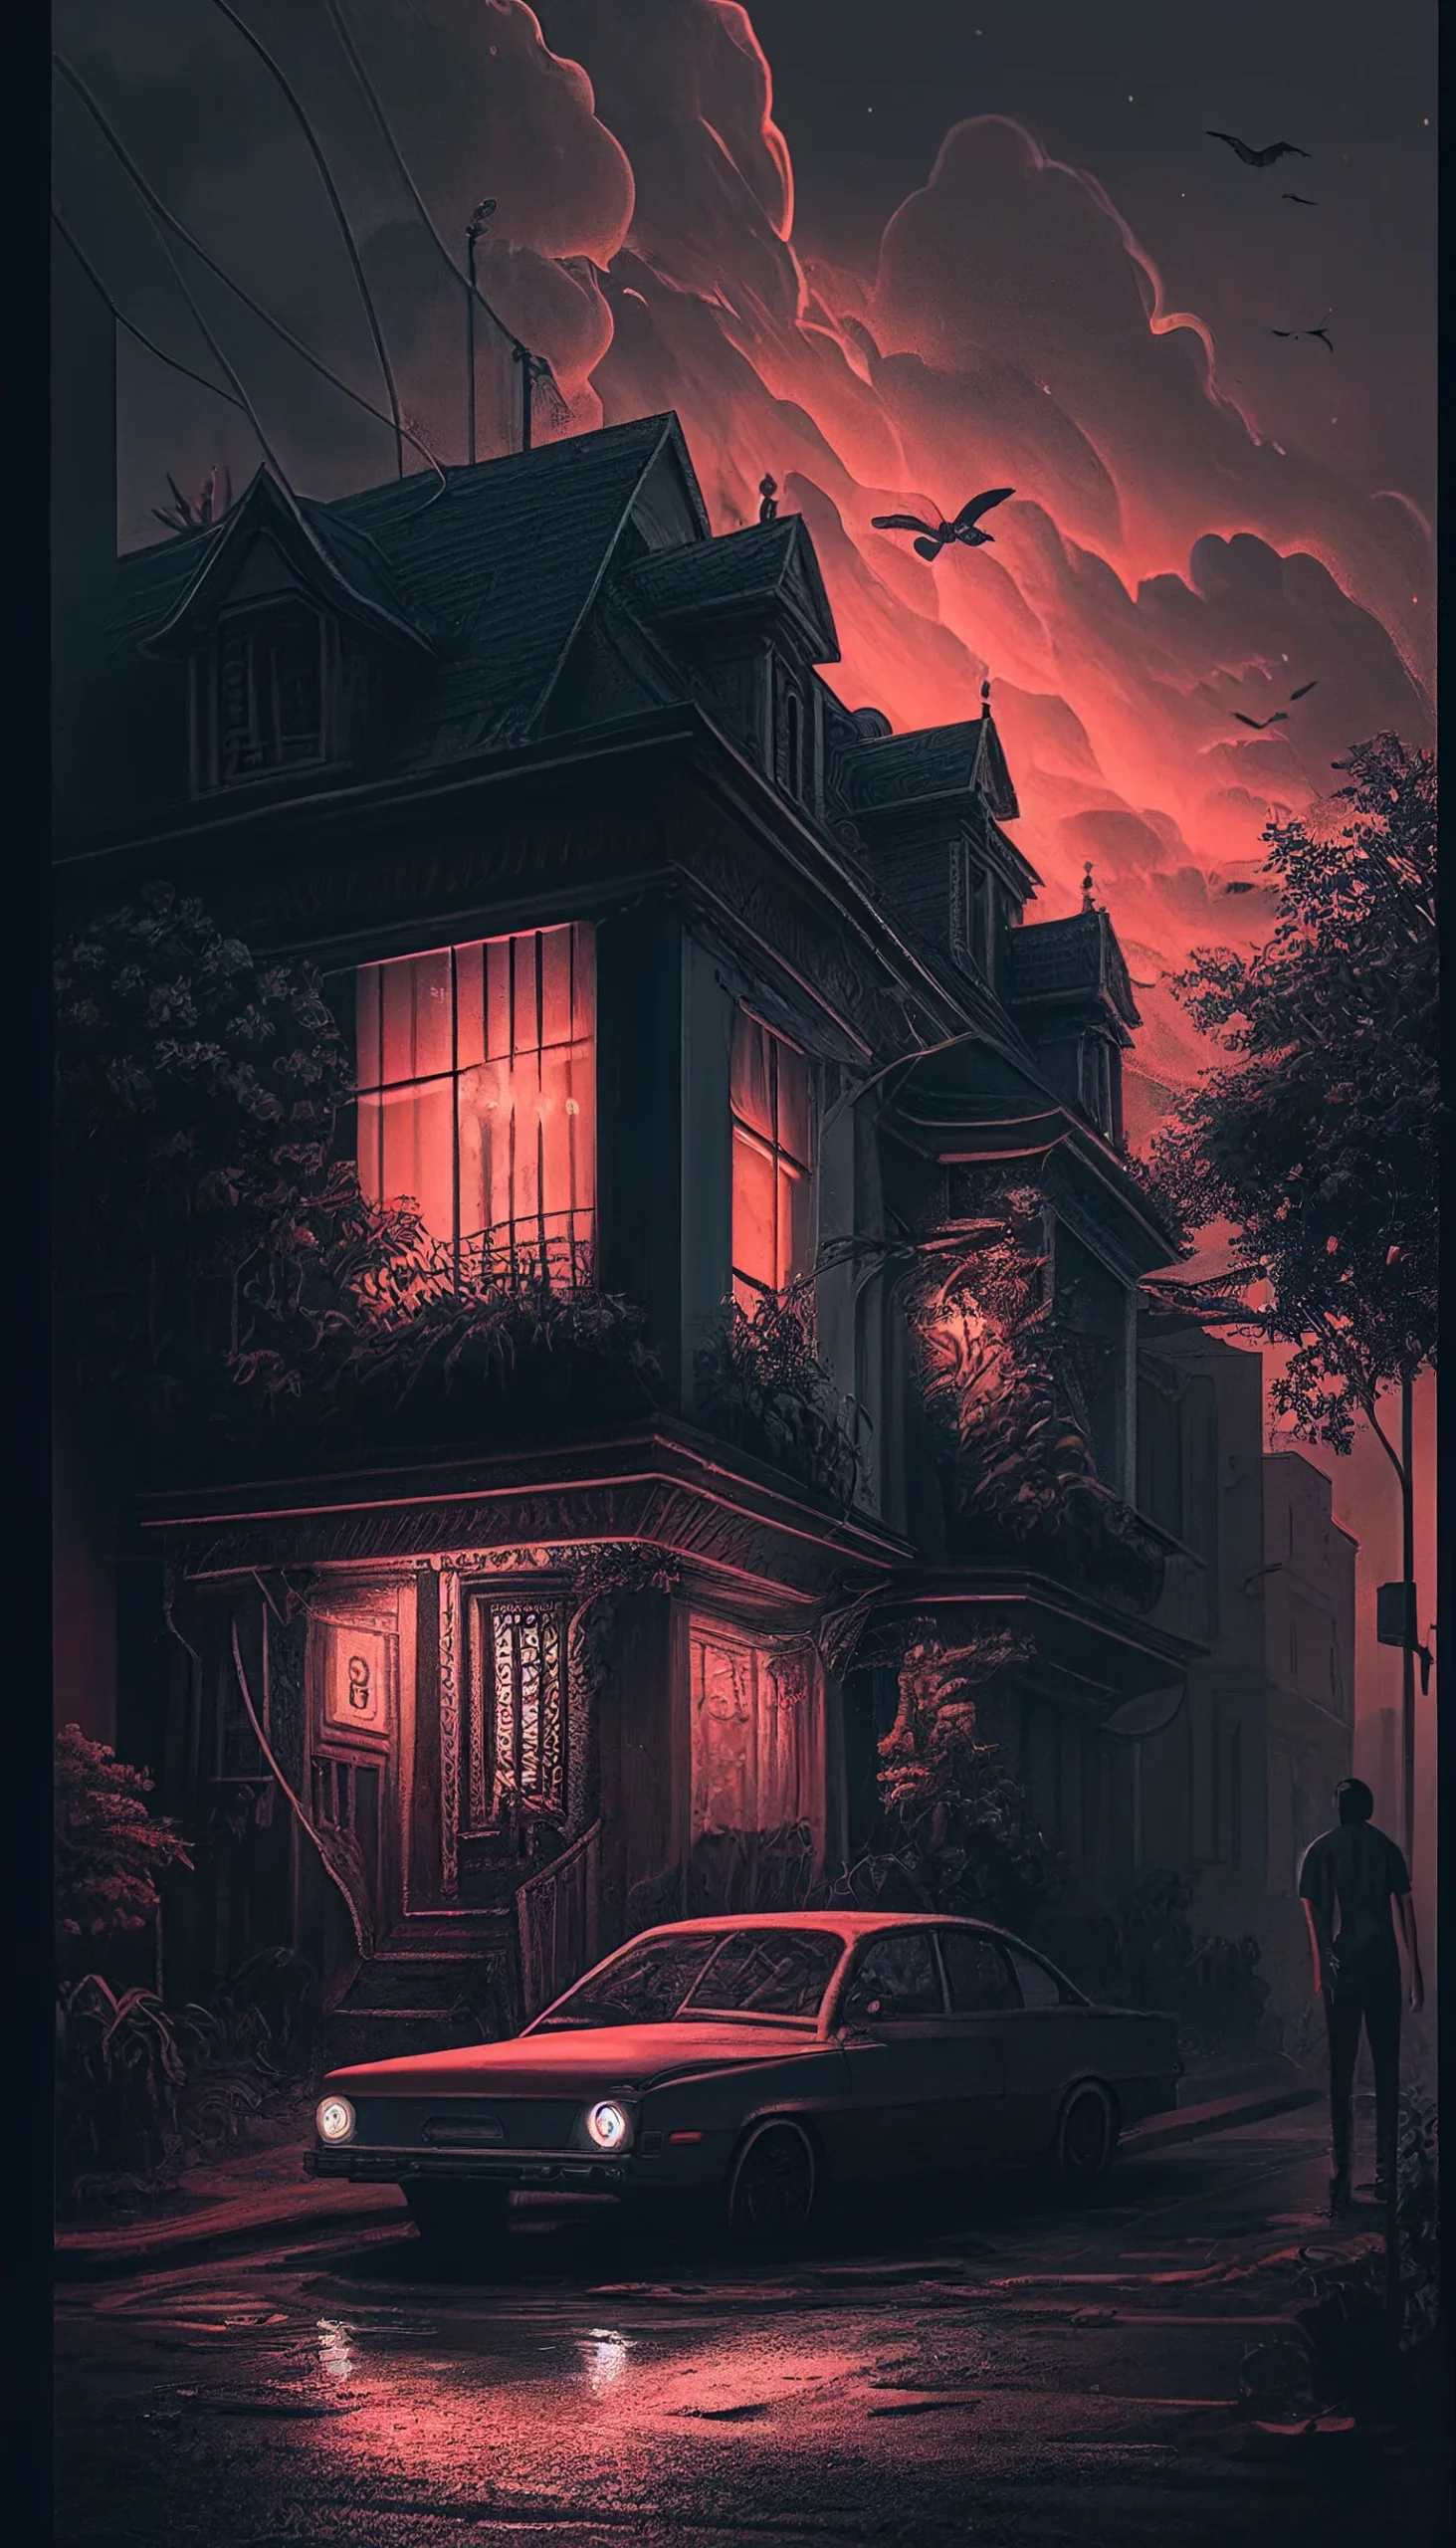 A painting of an old house with cars in front - Storm